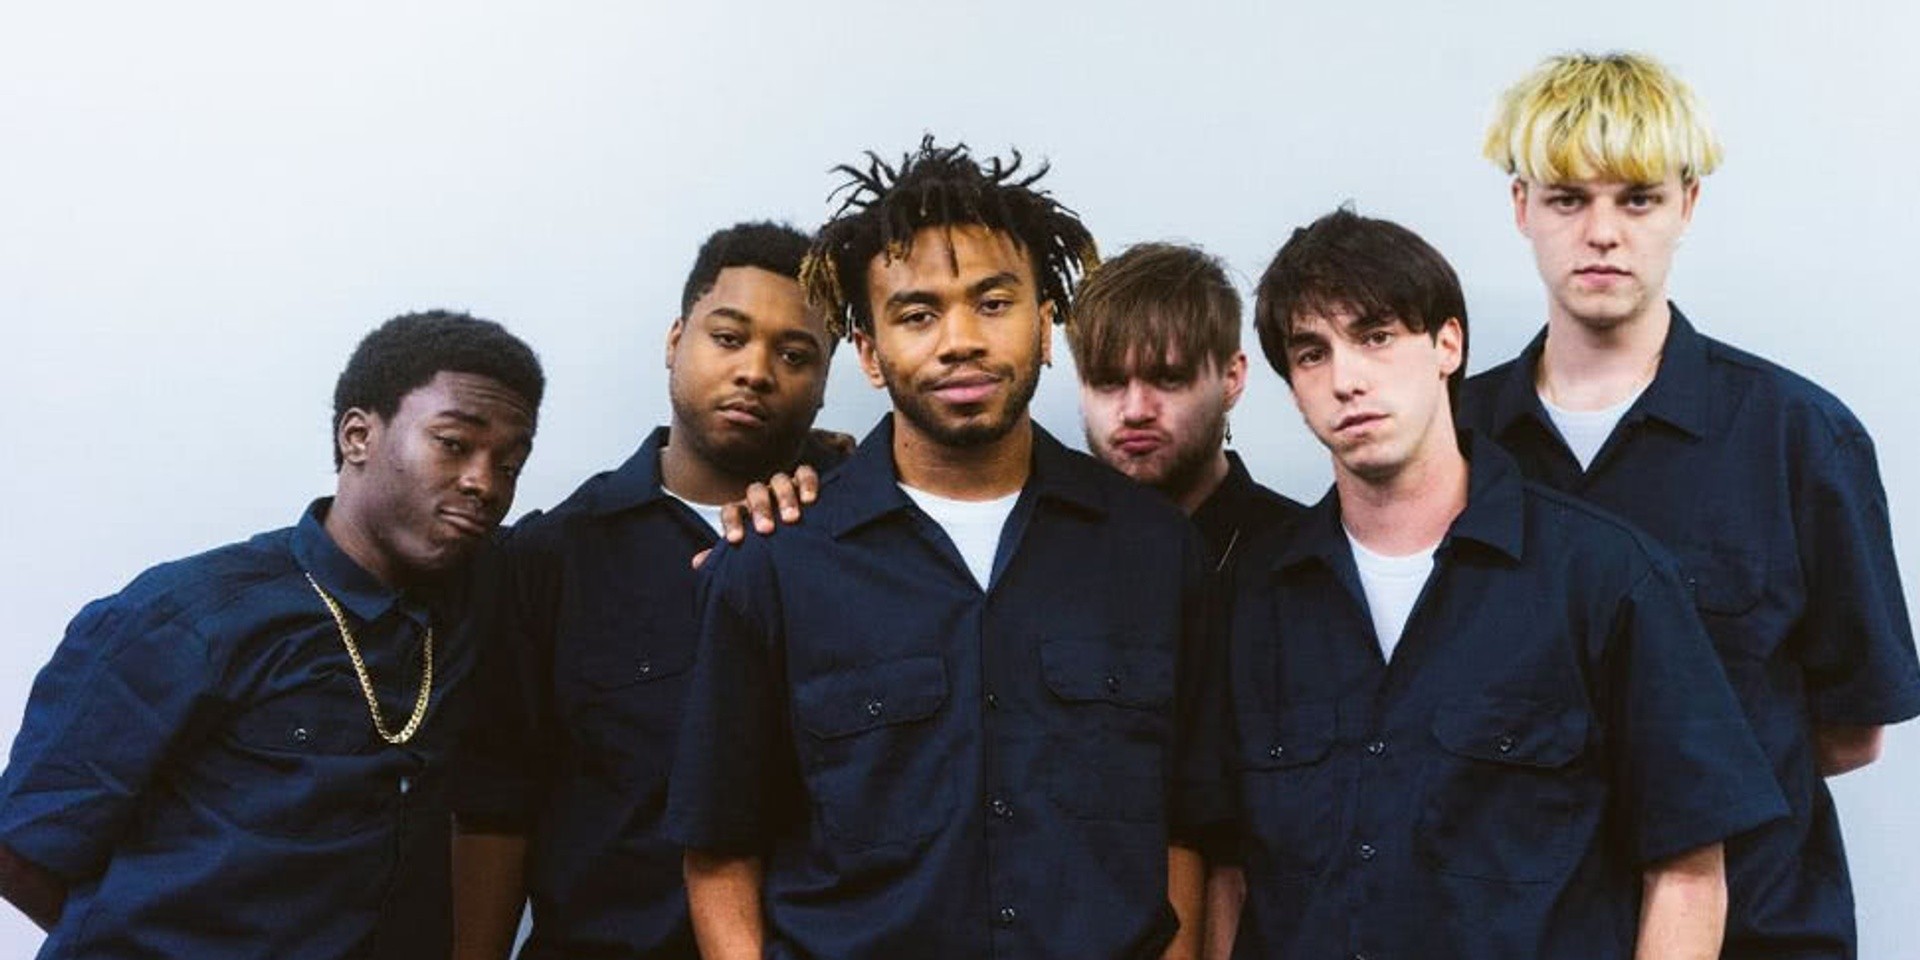 Brockhampton releases disorientating music video for new single, ‘I Been Born Again’ – watch